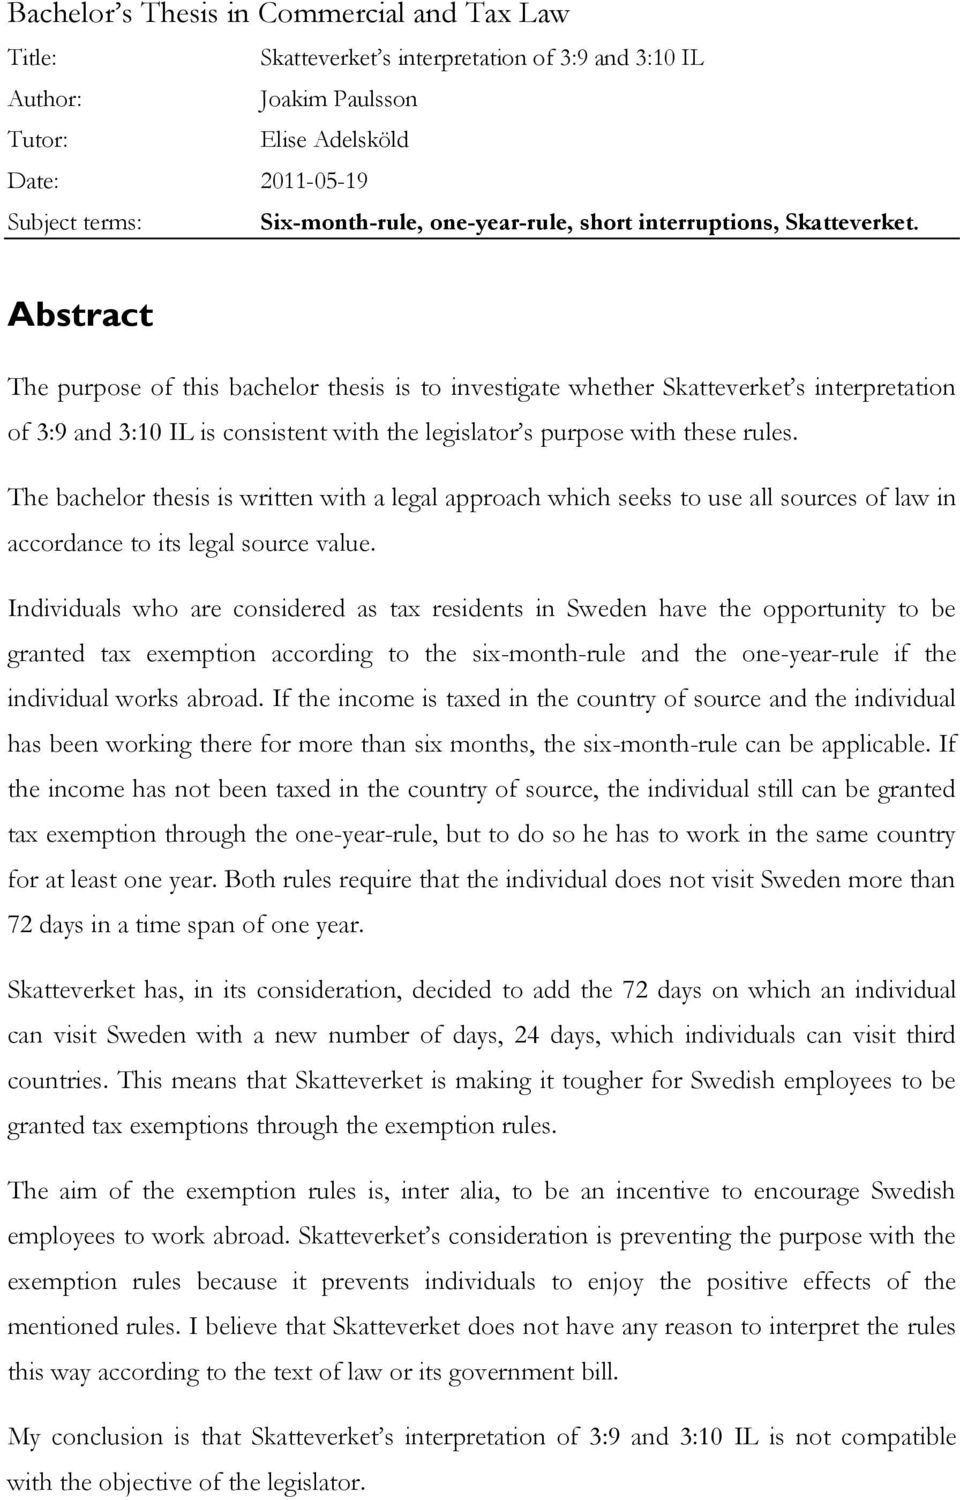 Abstract The purpose of this bachelor thesis is to investigate whether Skatteverket s interpretation of 3:9 and 3:10 IL is consistent with the legislator s purpose with these rules.